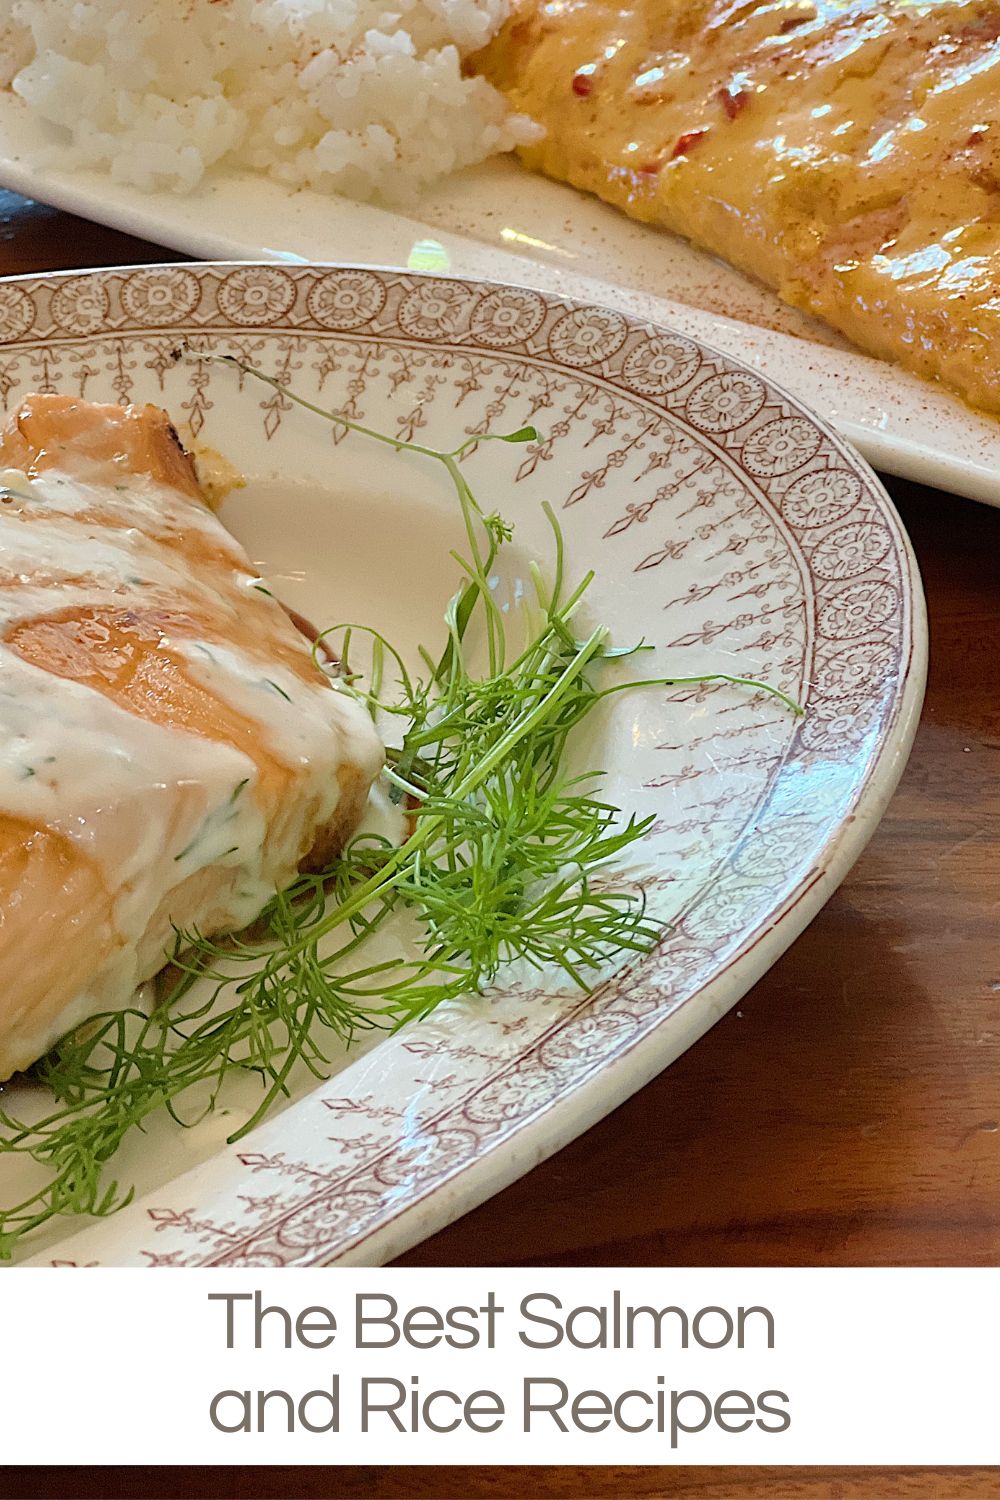 I love to cook salmon, whether we are entertaining or preparing a weeknight dinner. Today I am sharing my four best salmon and rice recipes!